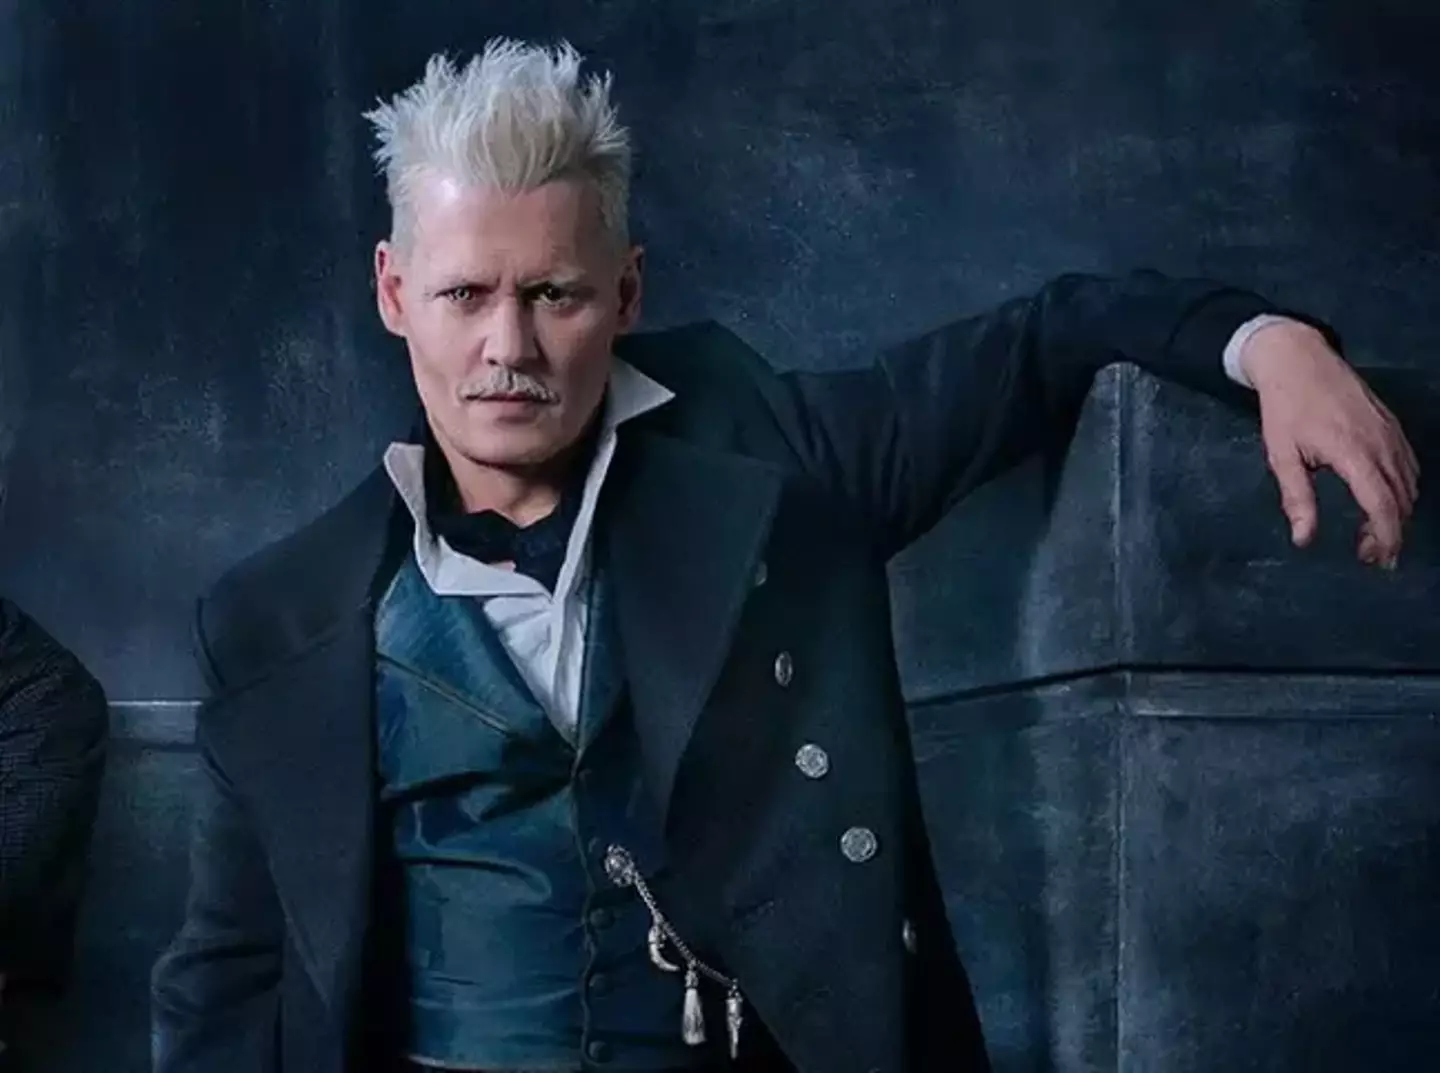 Johnny Depp starred as Grindelwald in the first two films (